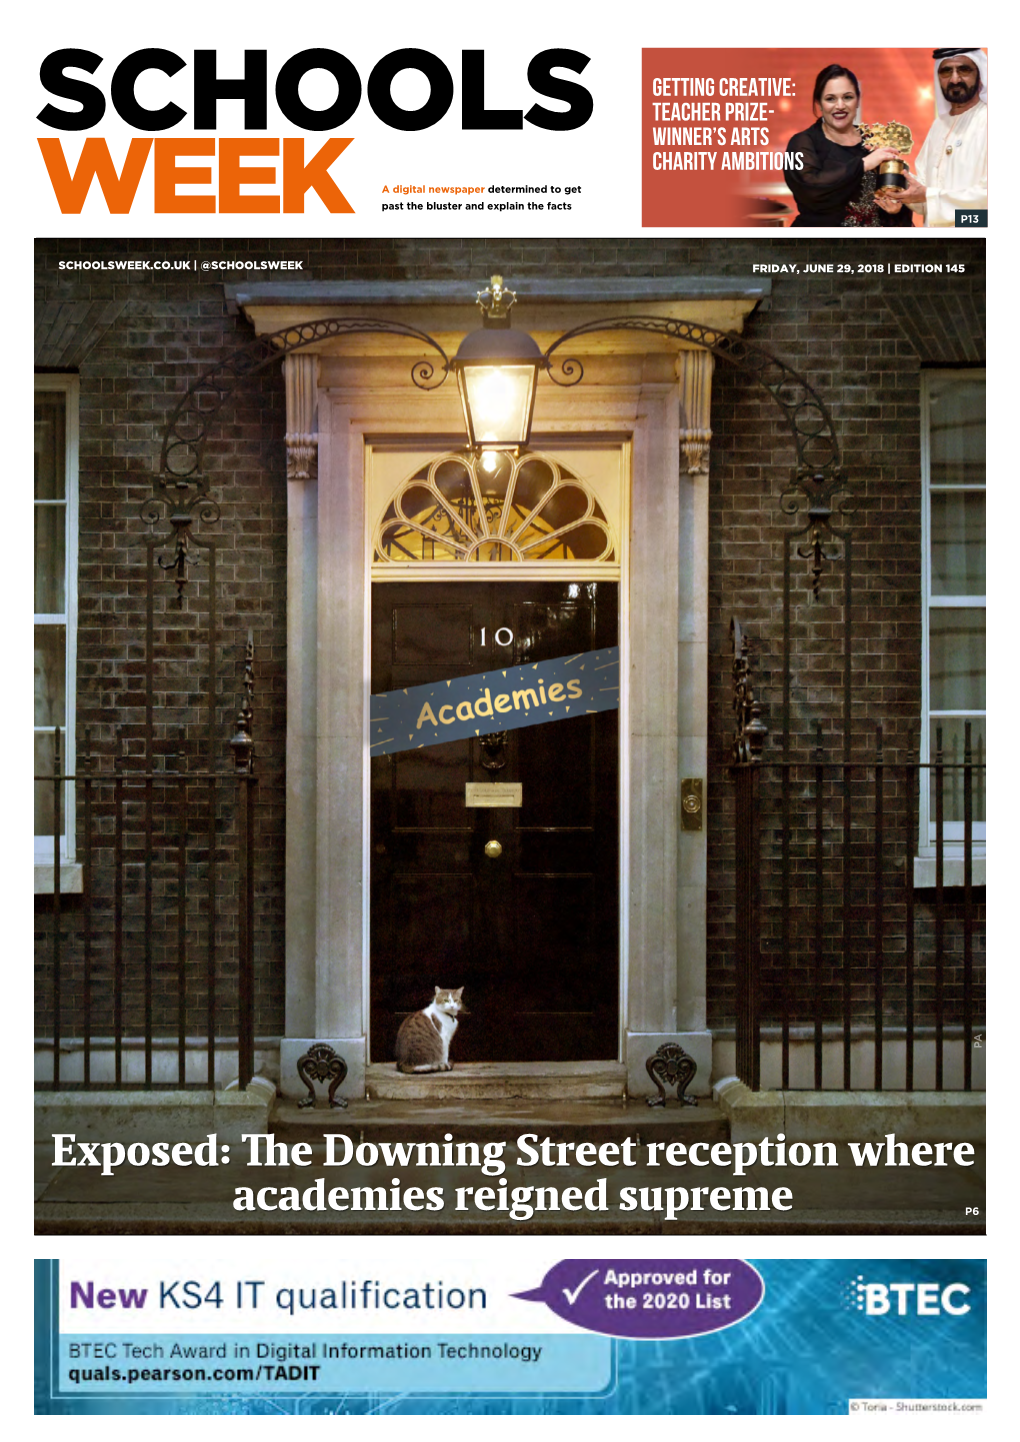 The Downing Street Reception Where Academies Reigned Supreme